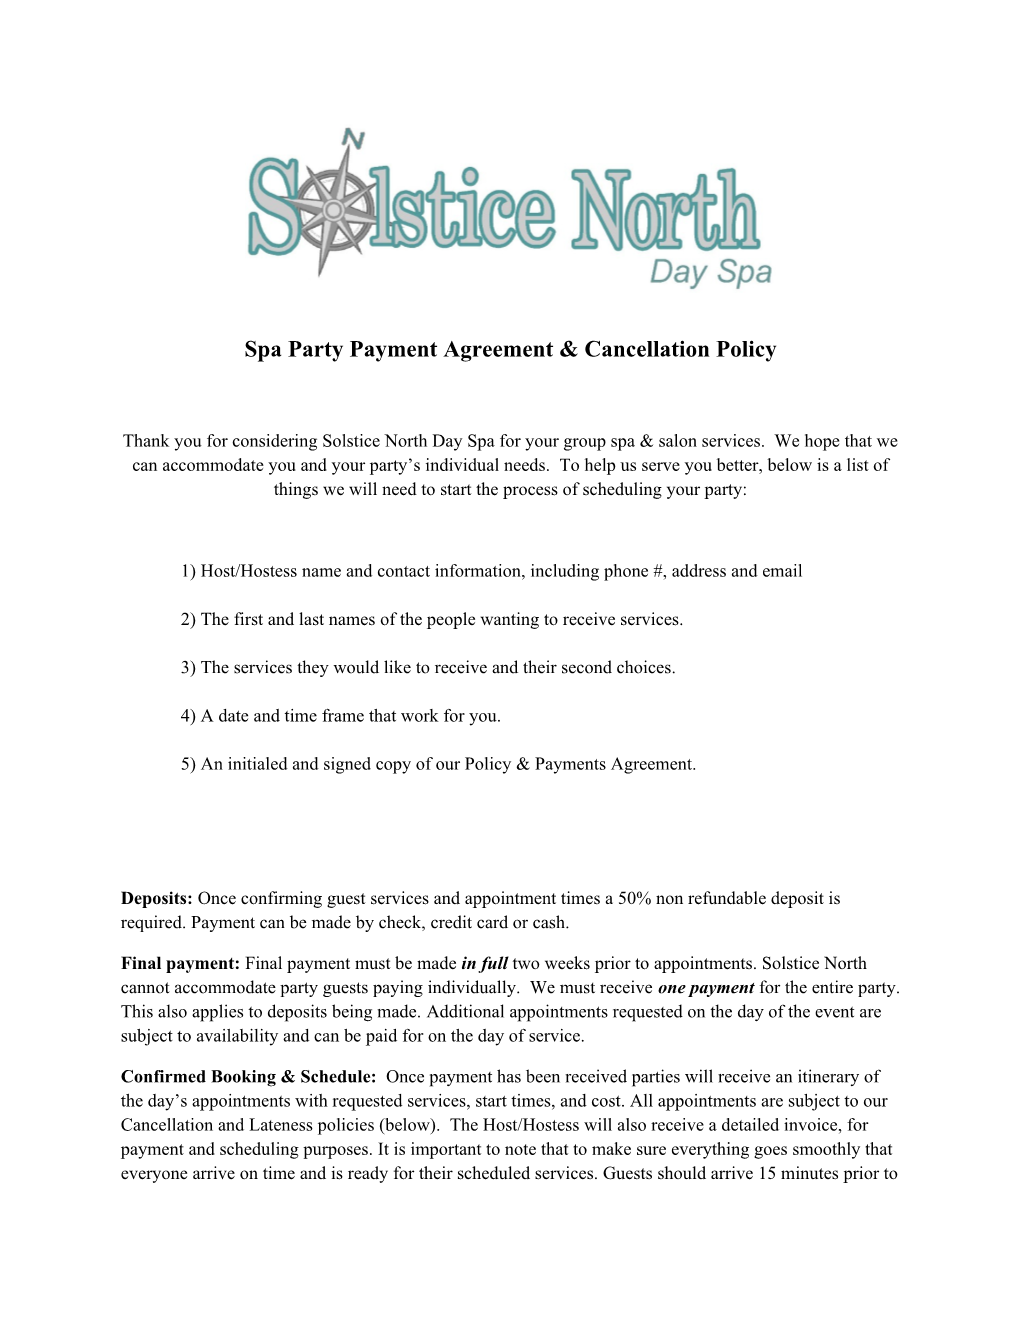 Spa Party Payment Agreement & Cancellation Policy